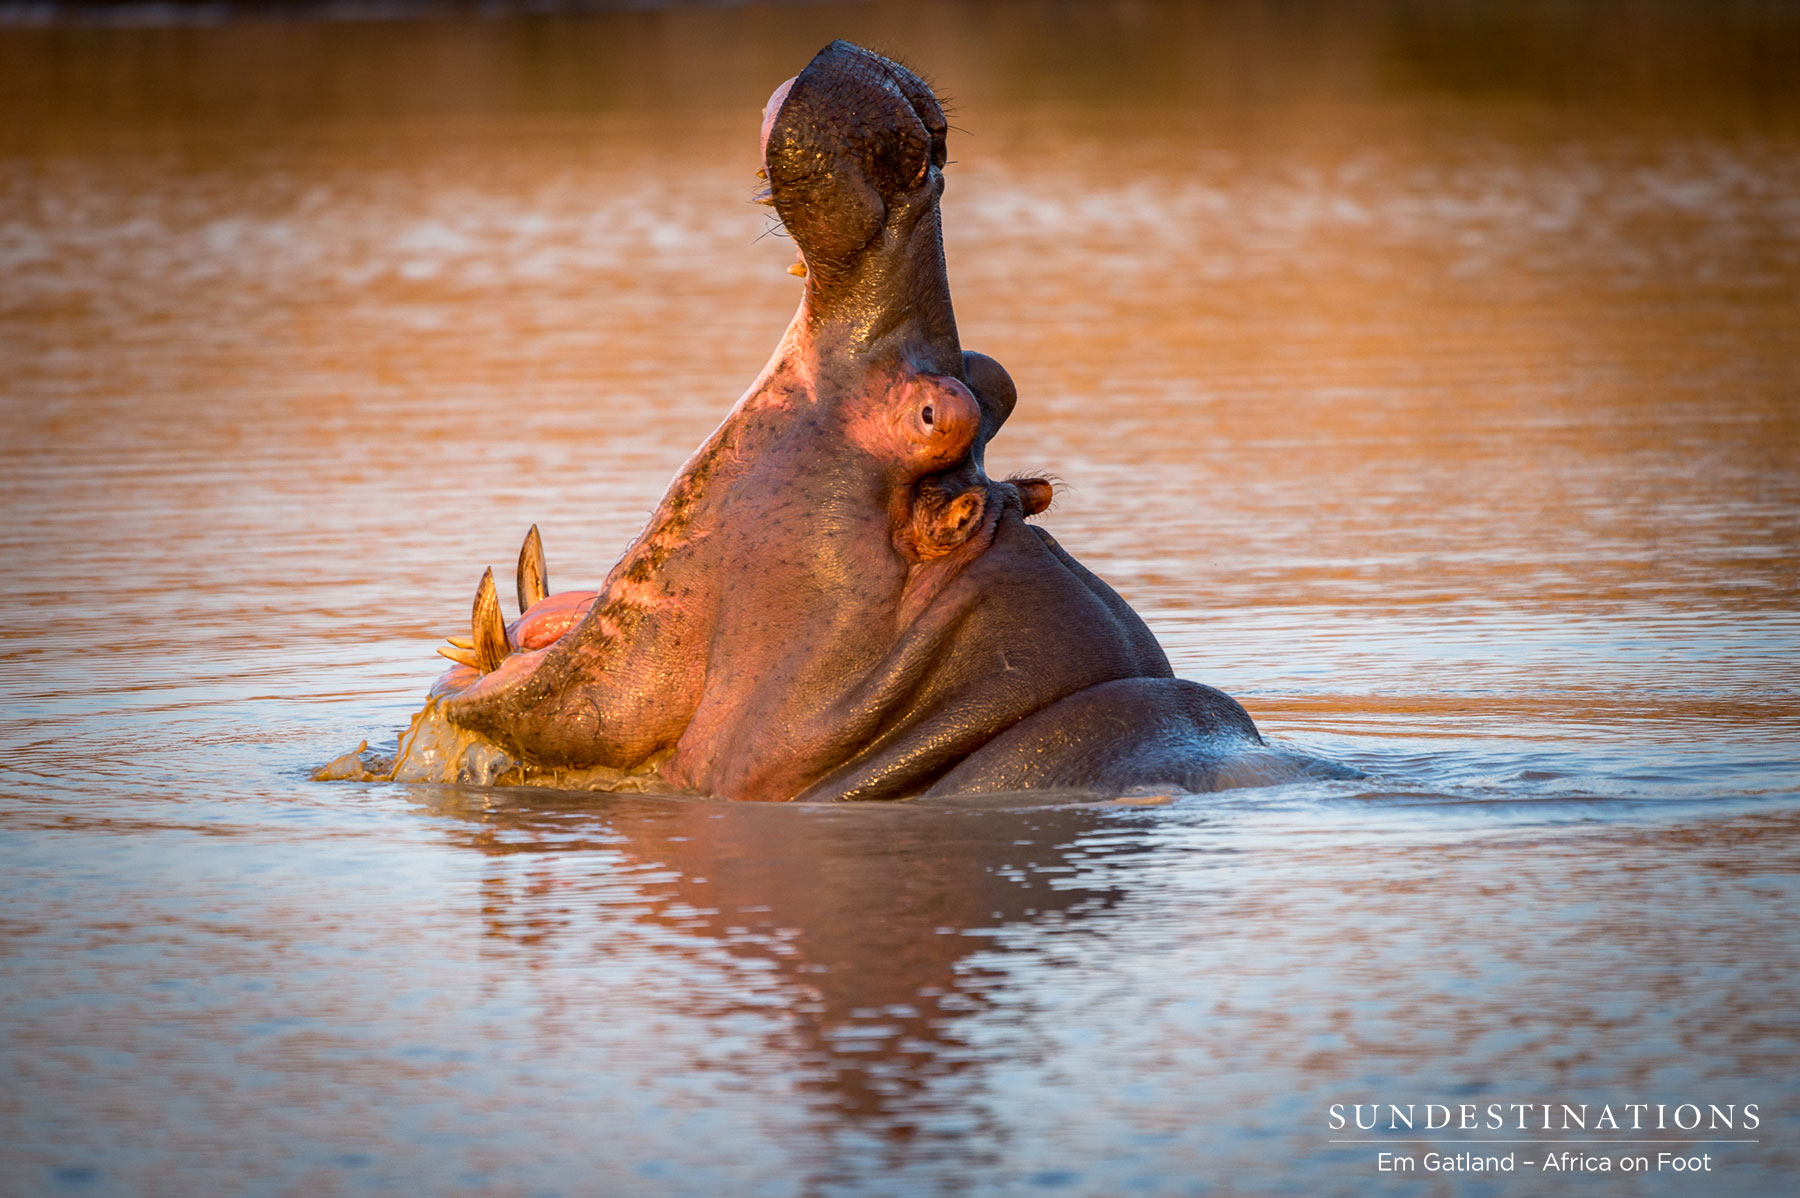 Hippo at Africa on Foot